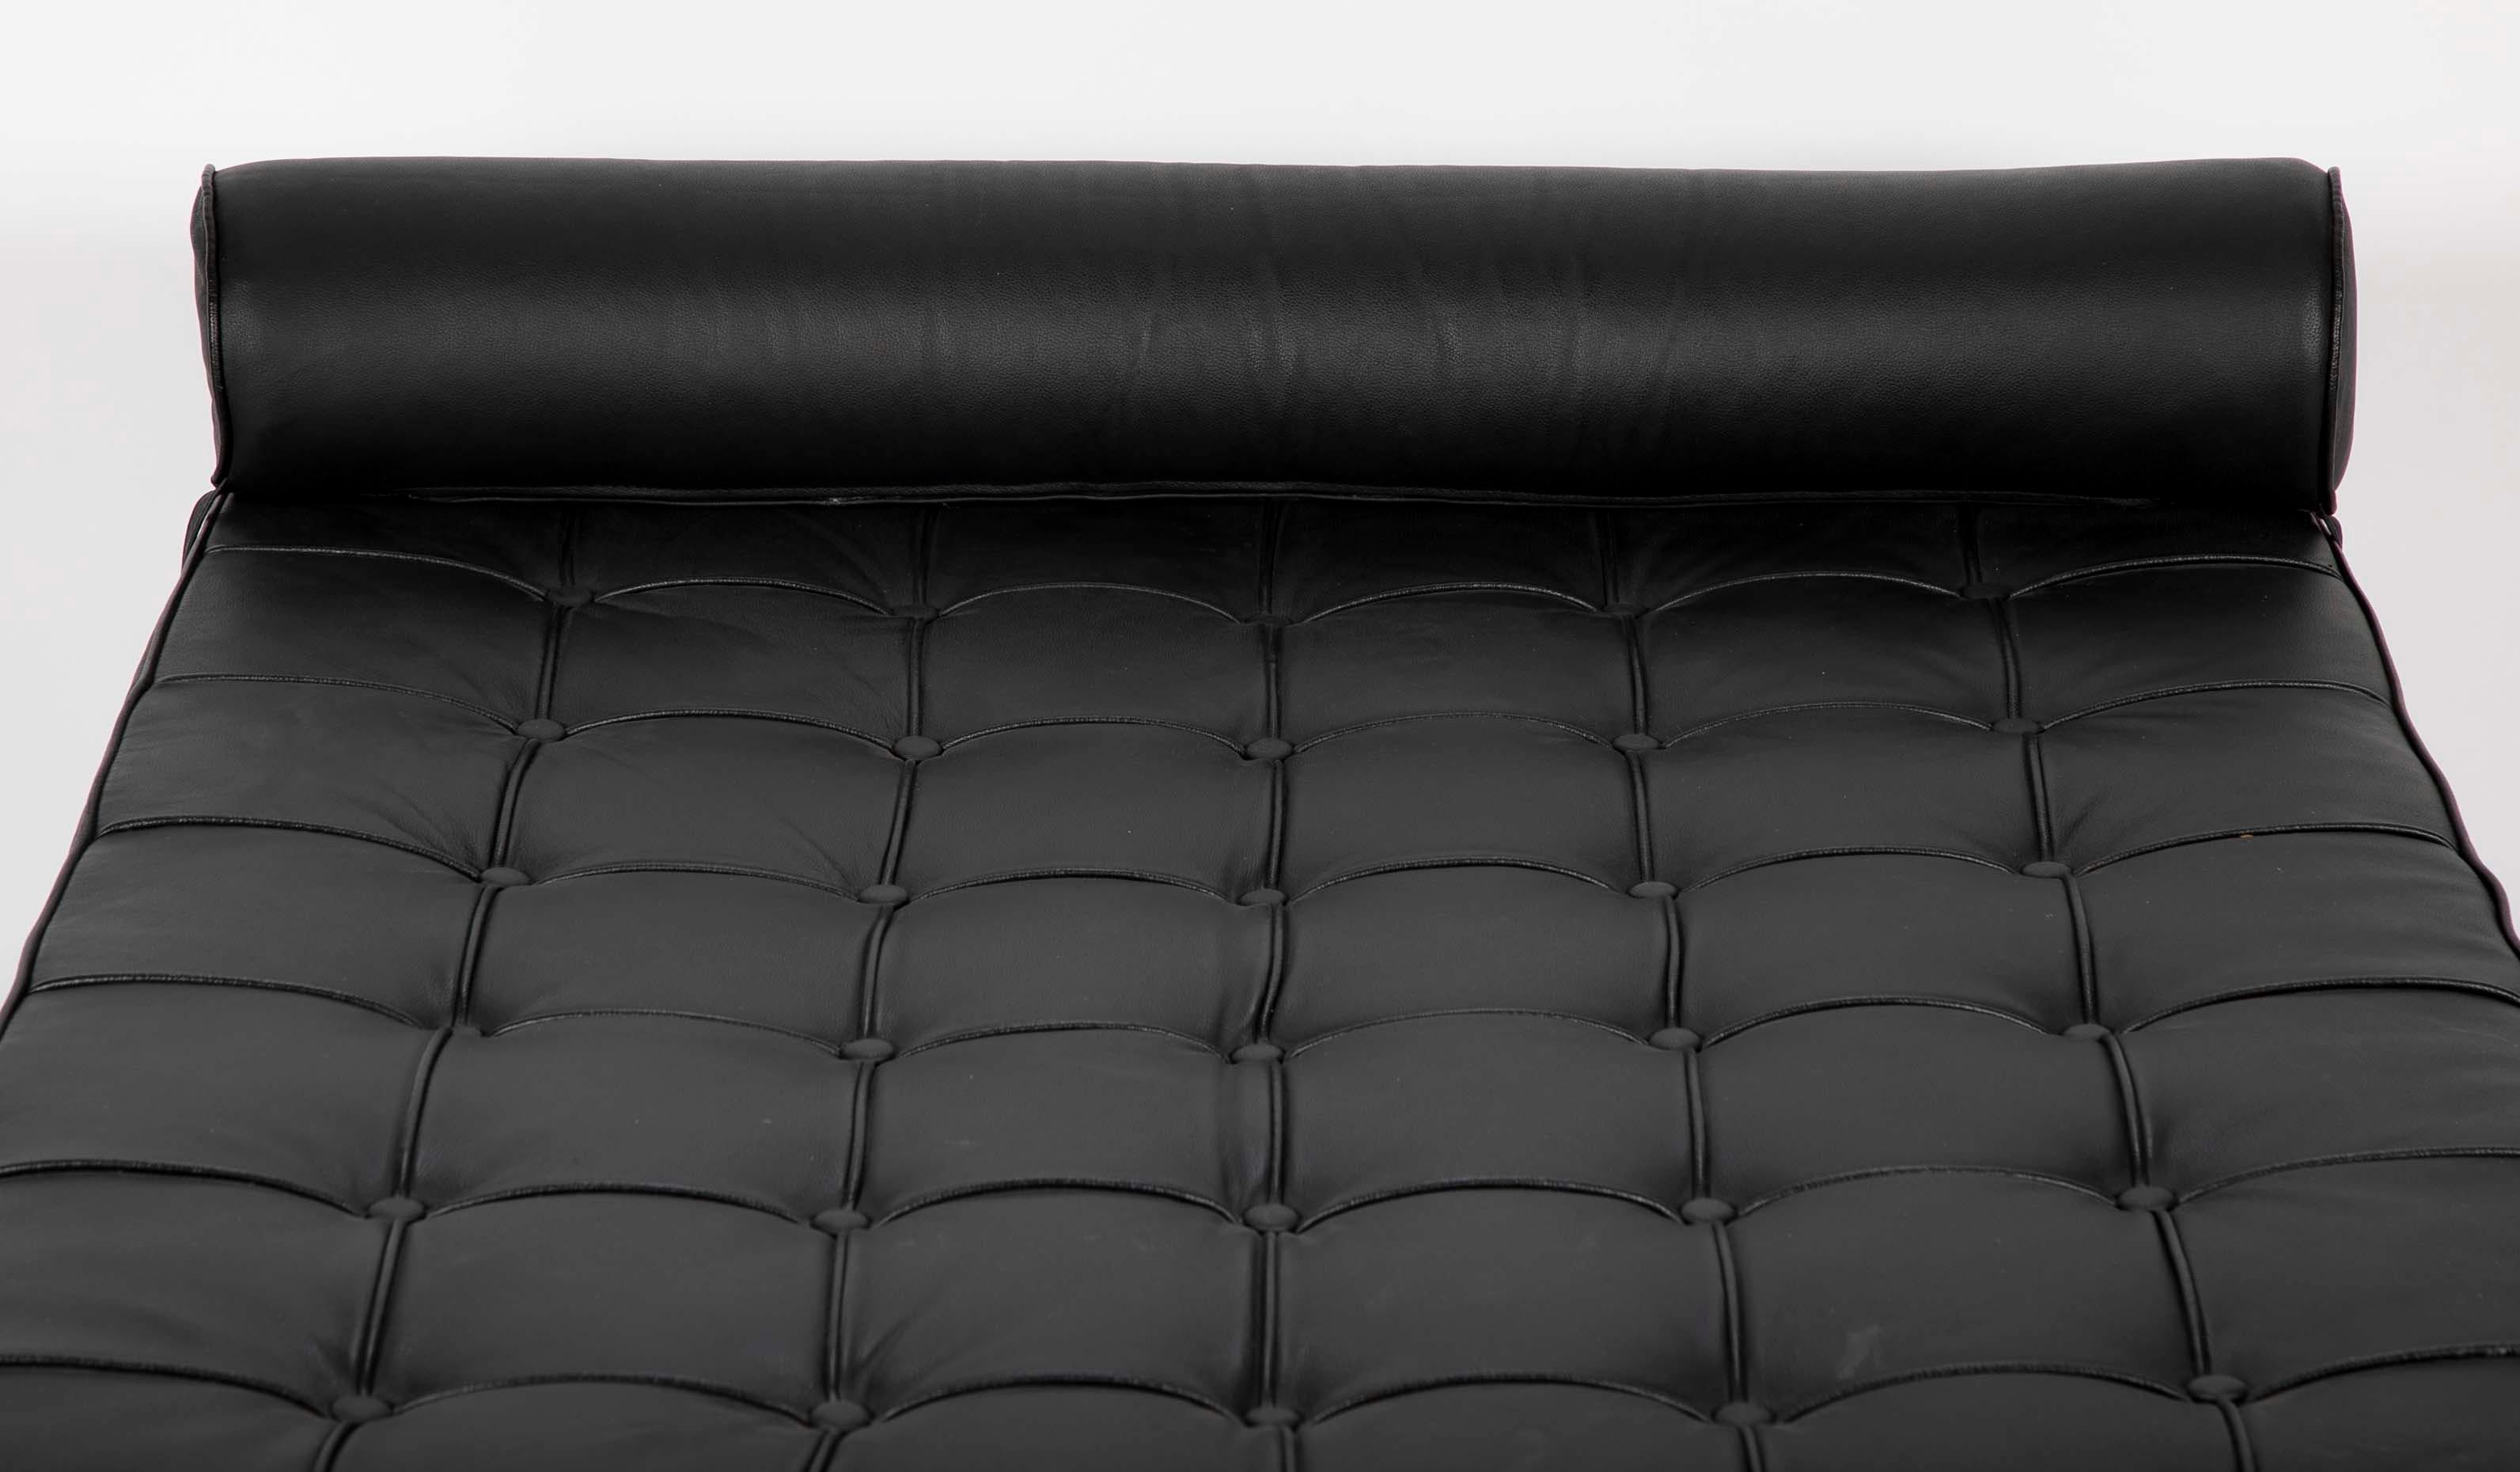 20th Century Black Leatherette Chaise Lounge in the Manner of Mies van der Rohe